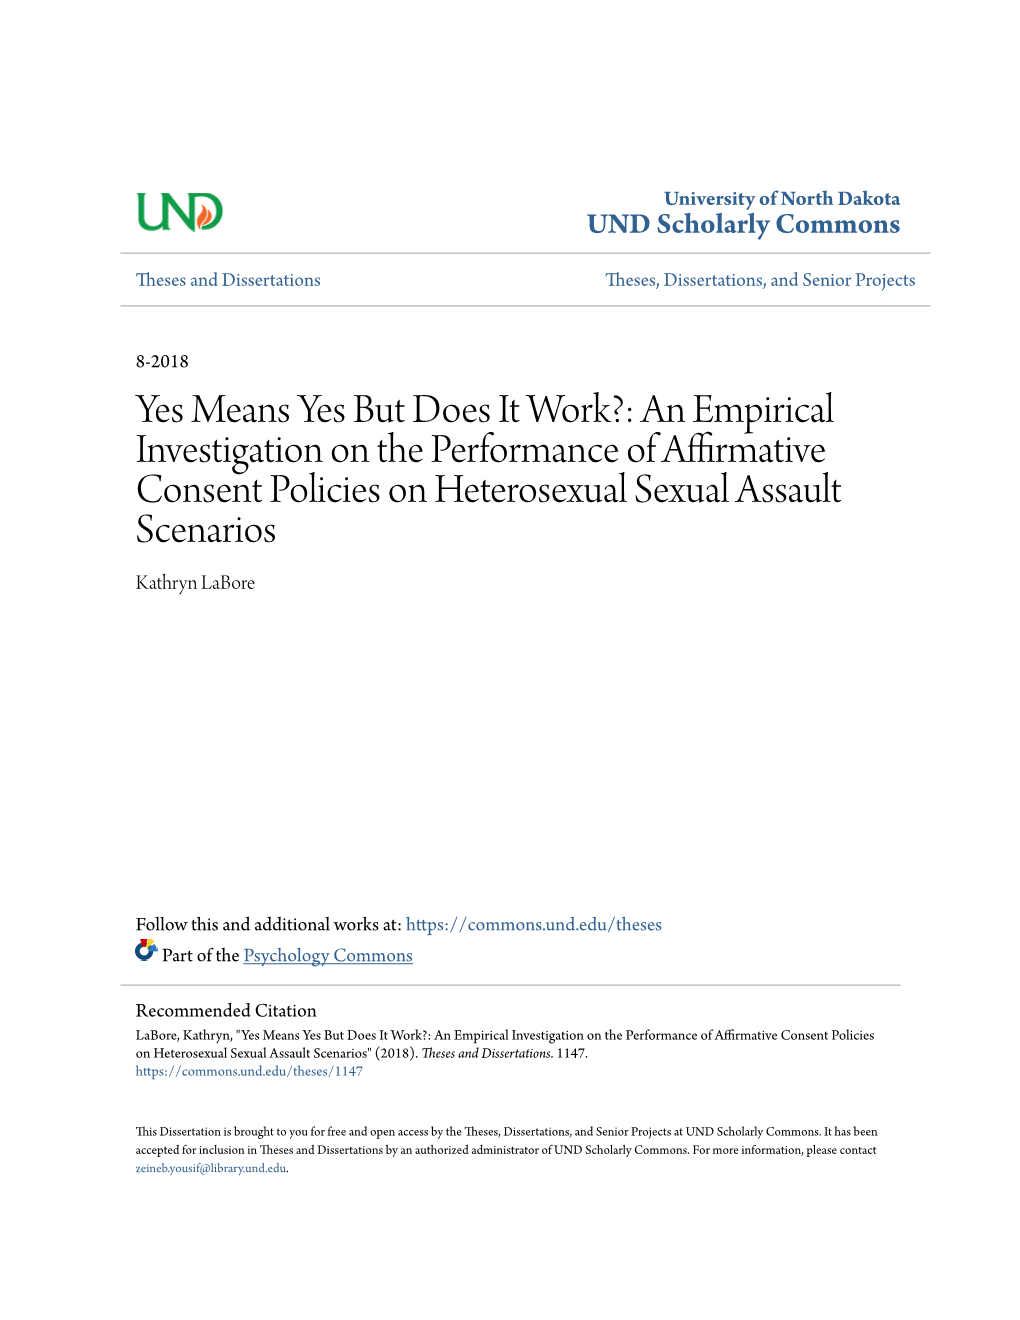 Yes Means Yes but Does It Work?: an Empirical Investigation on the Performance of Affirmative Consent Policies on Heterosexual Sexual Assault Scenarios Kathryn Labore